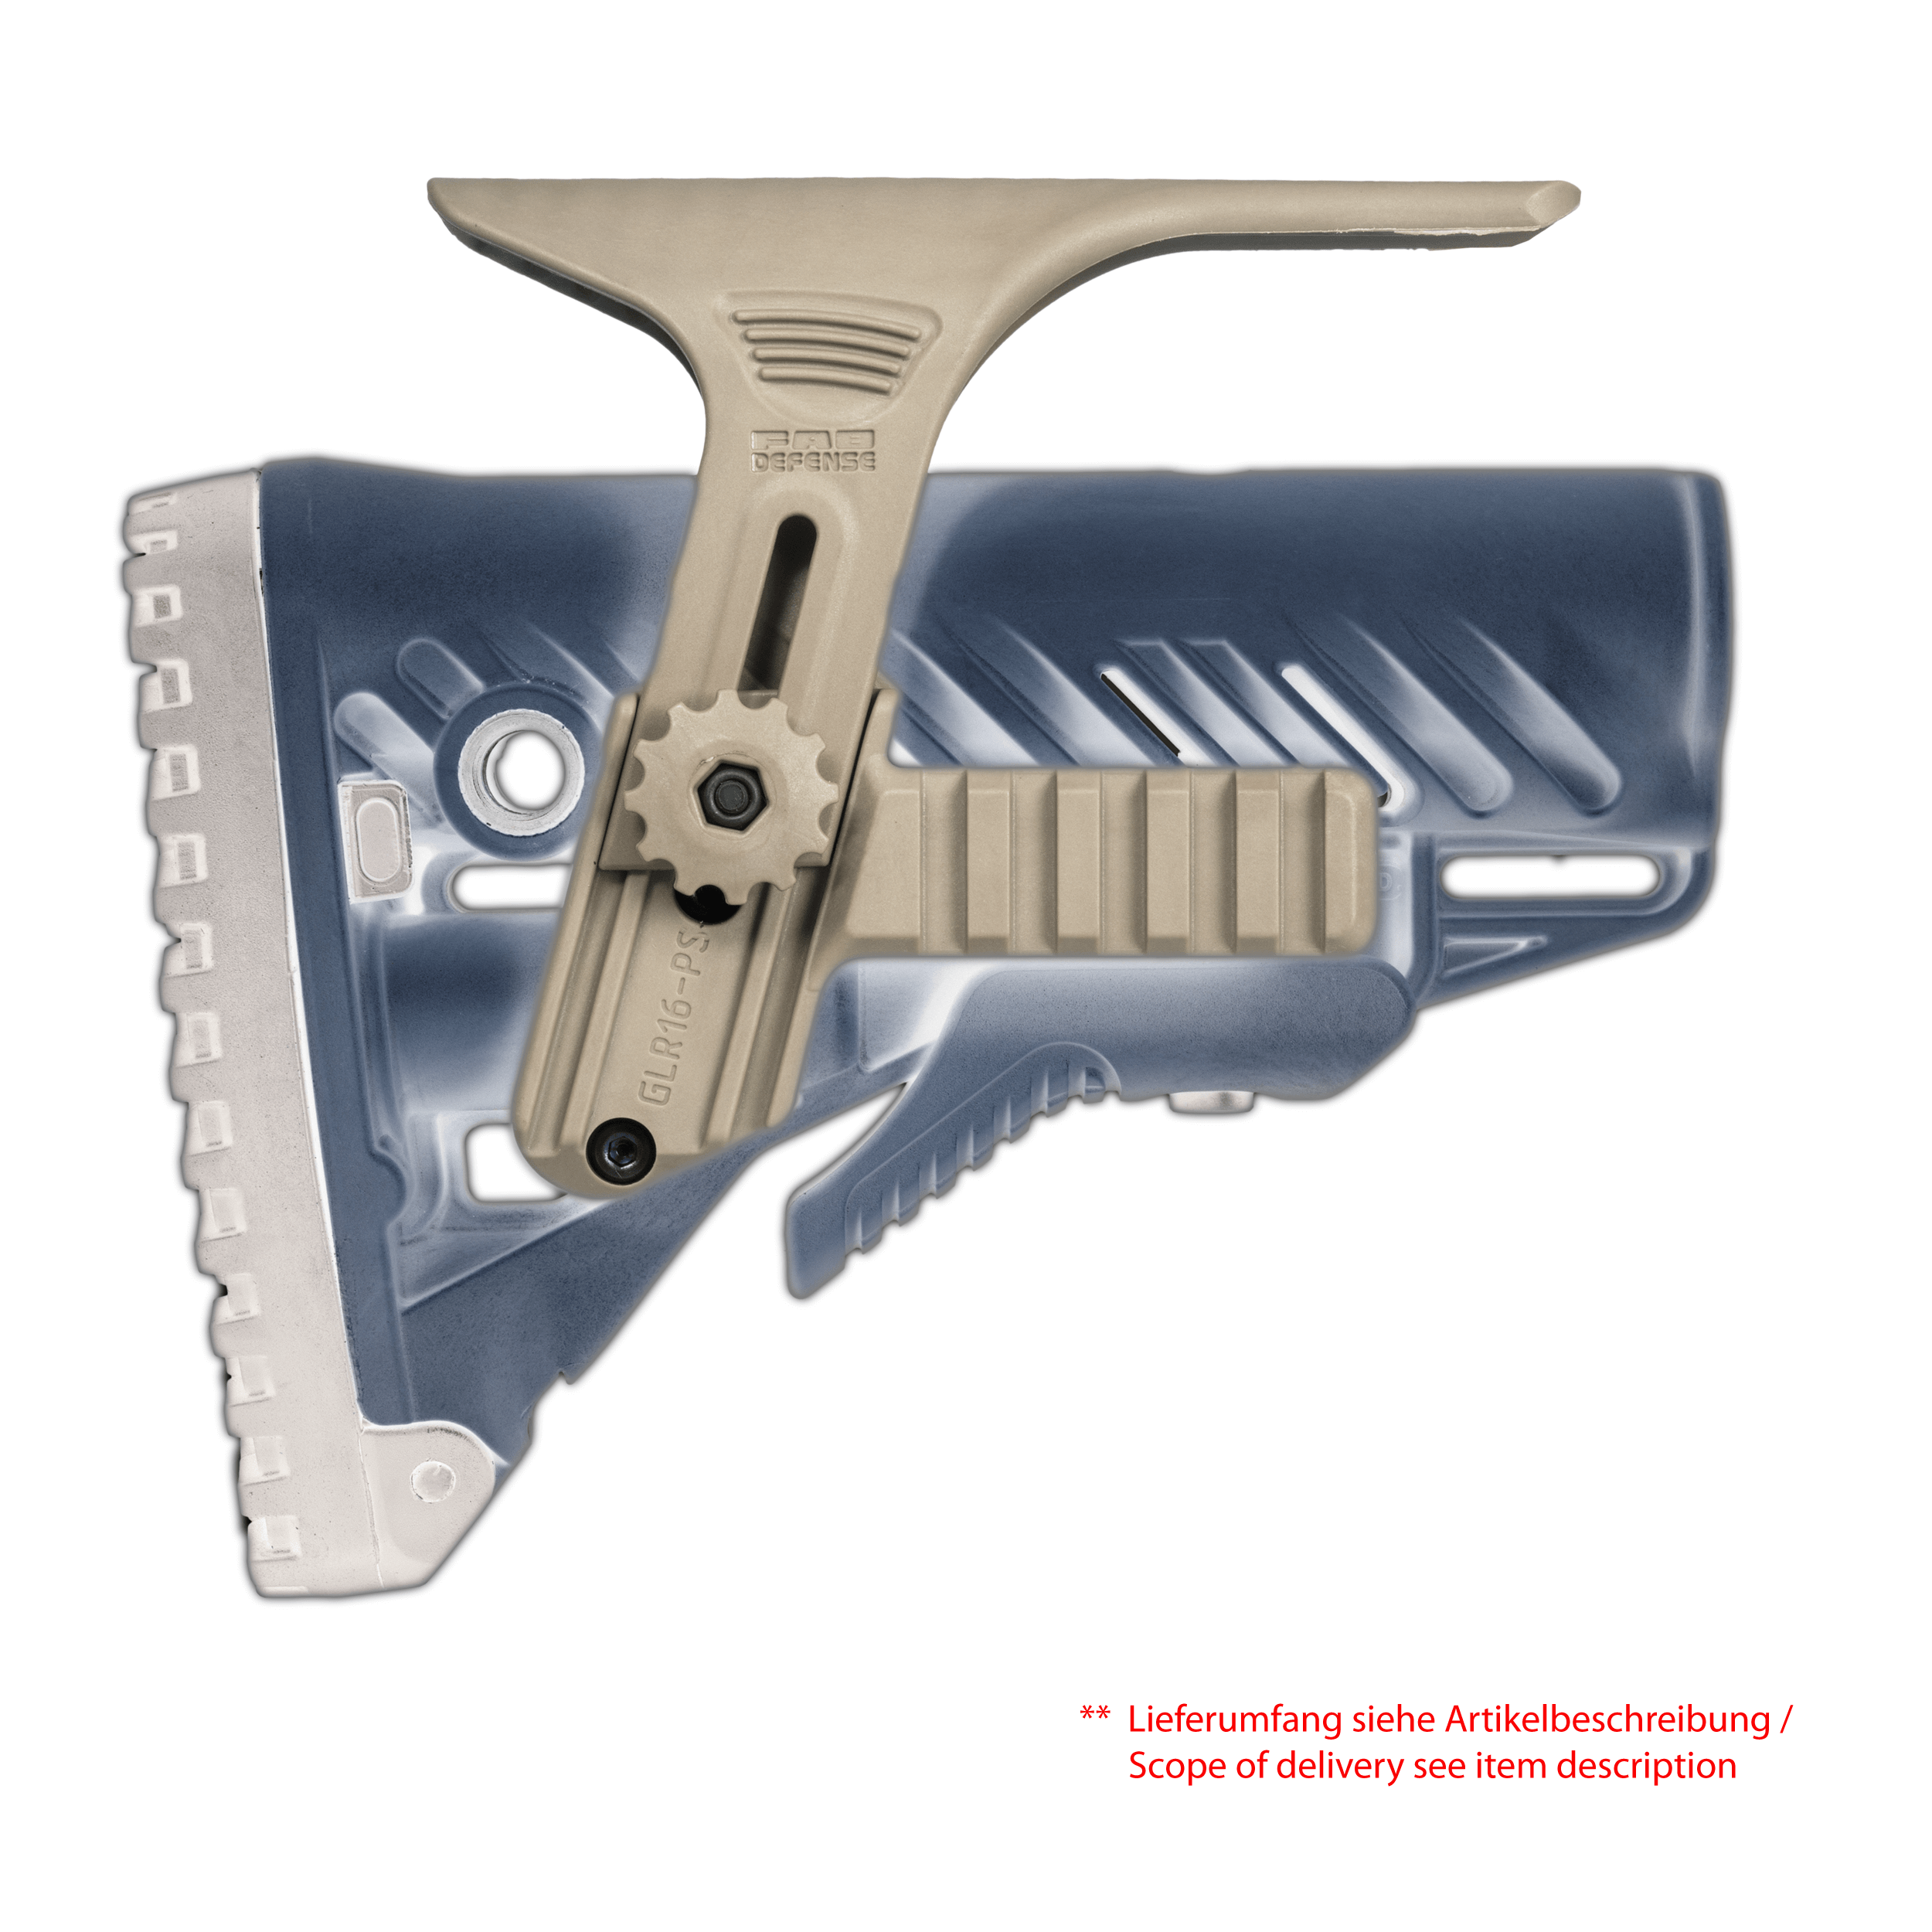 GPCP Cheek Rest Kit with Built in Dual picatinny rails for GLR-16